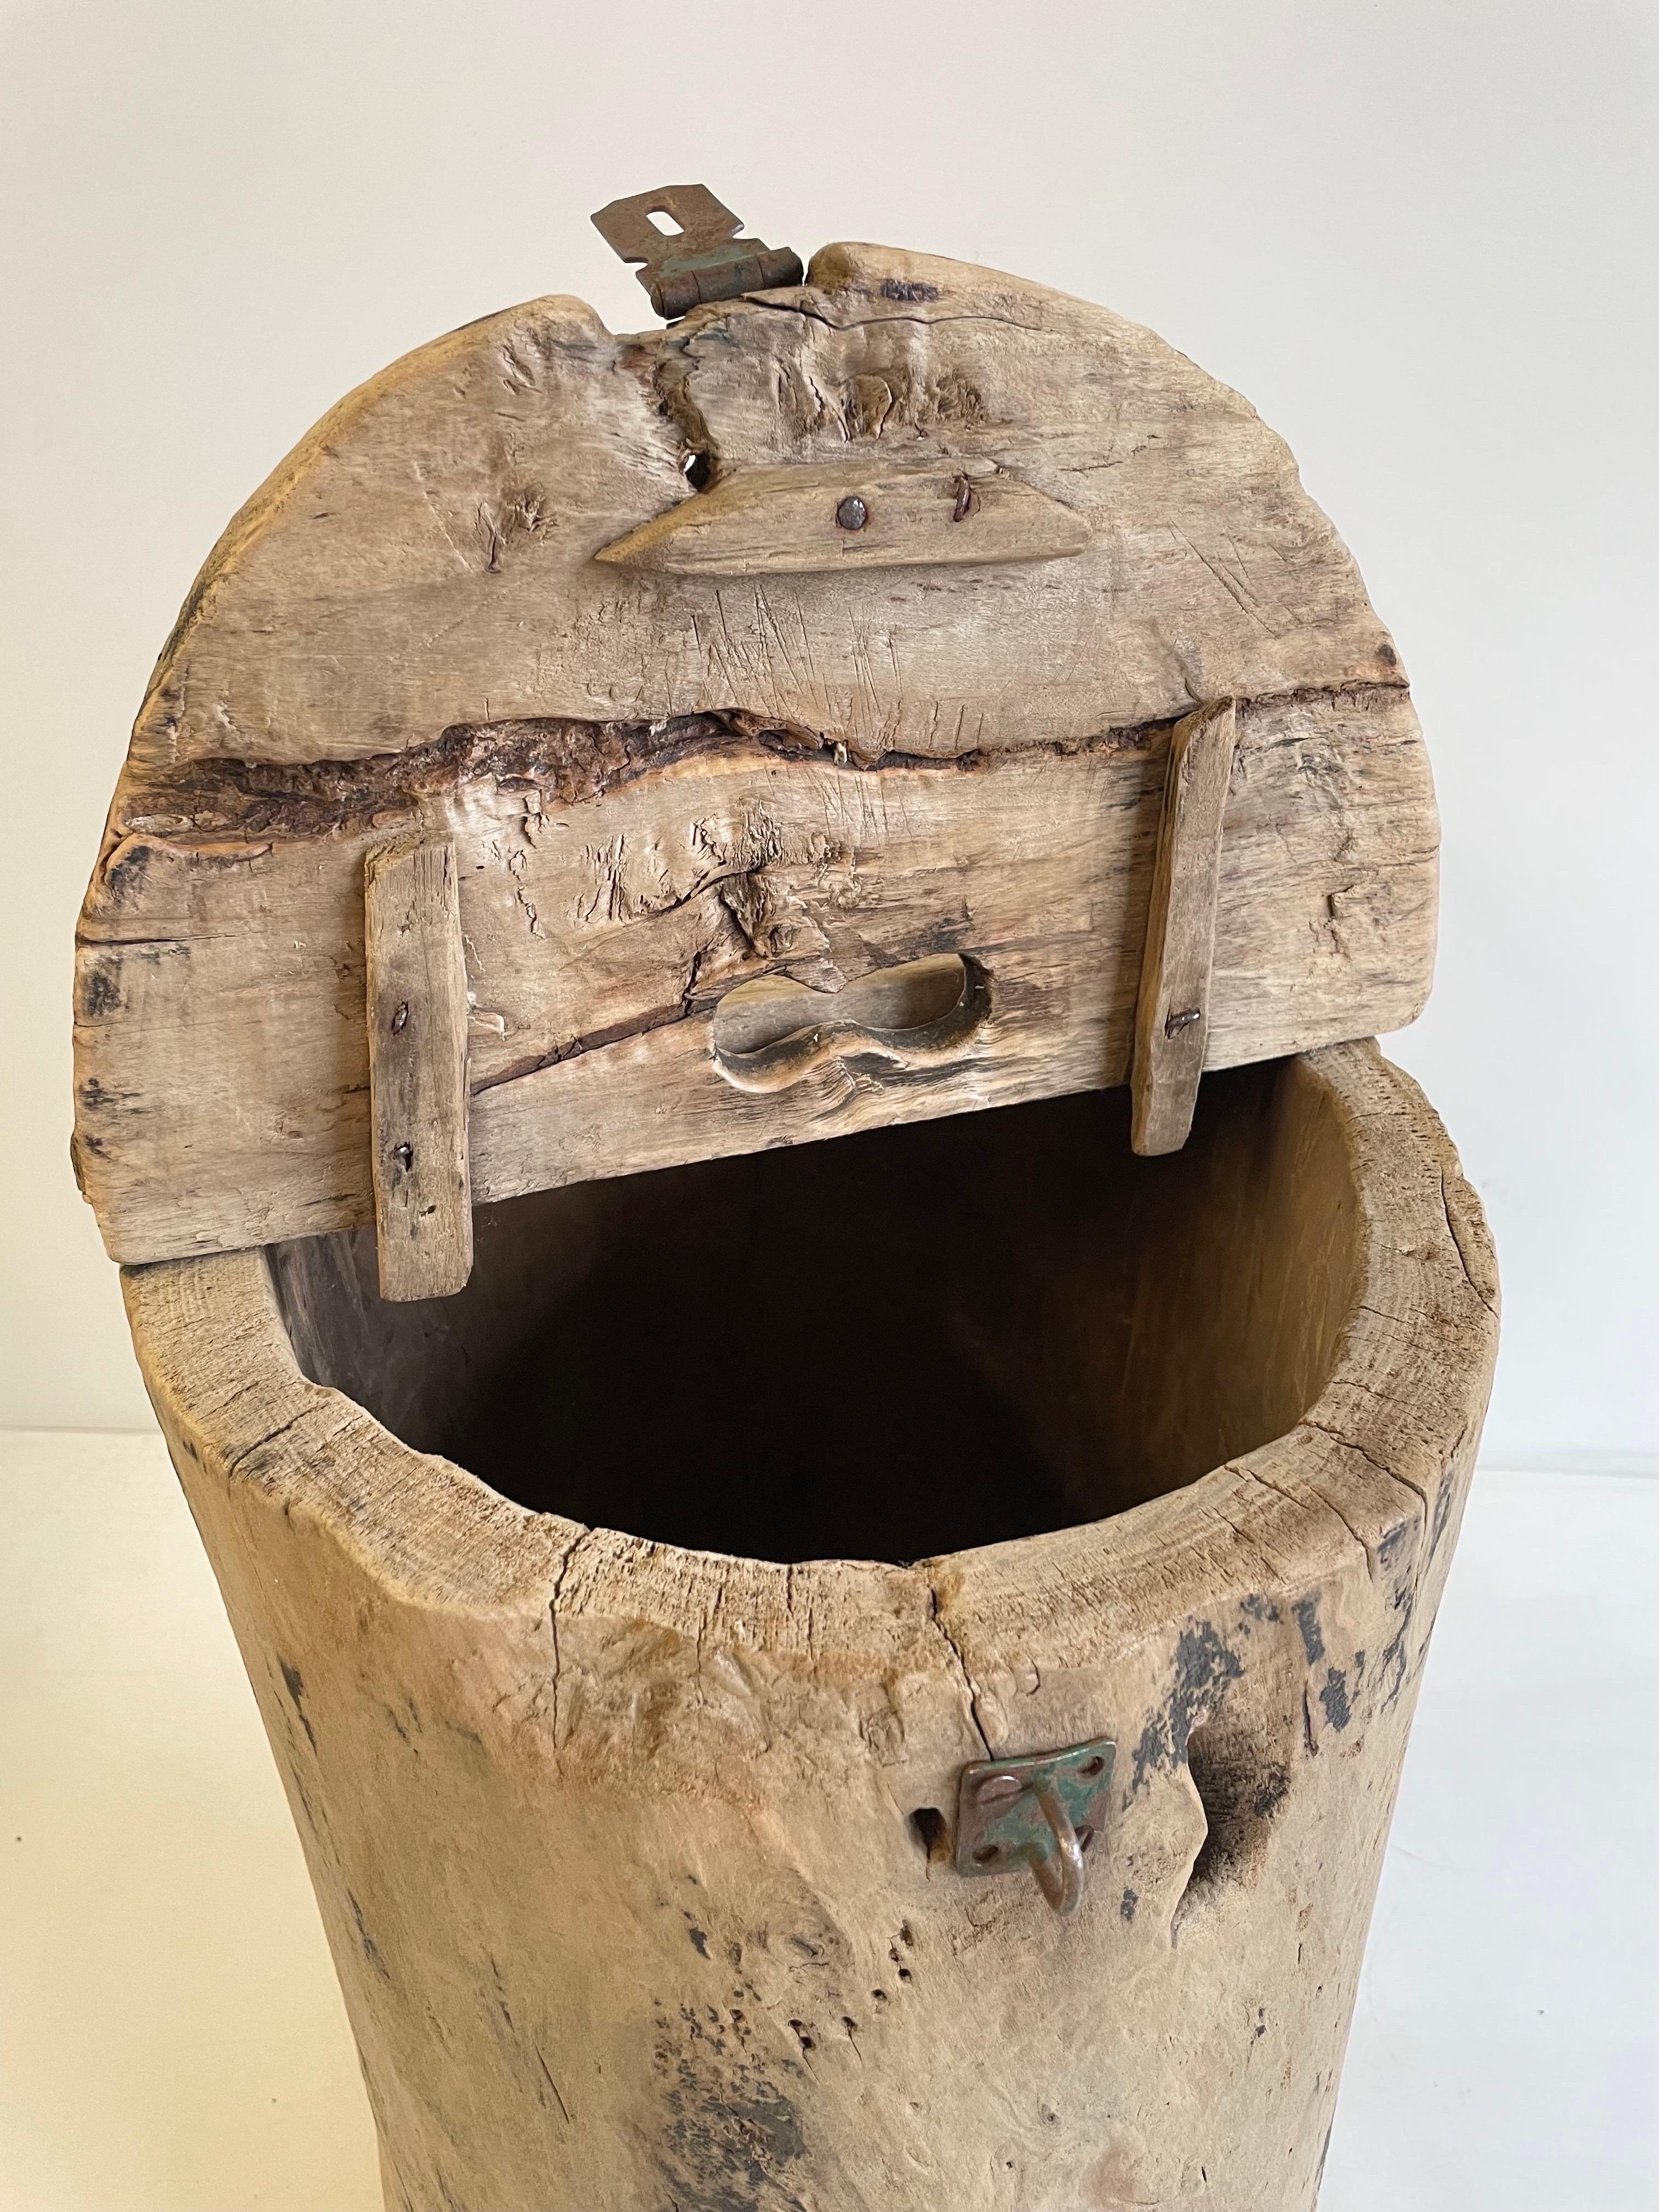 Cypress Wood Side Table Carved From a Stump Bucket with Lid For Sale 4